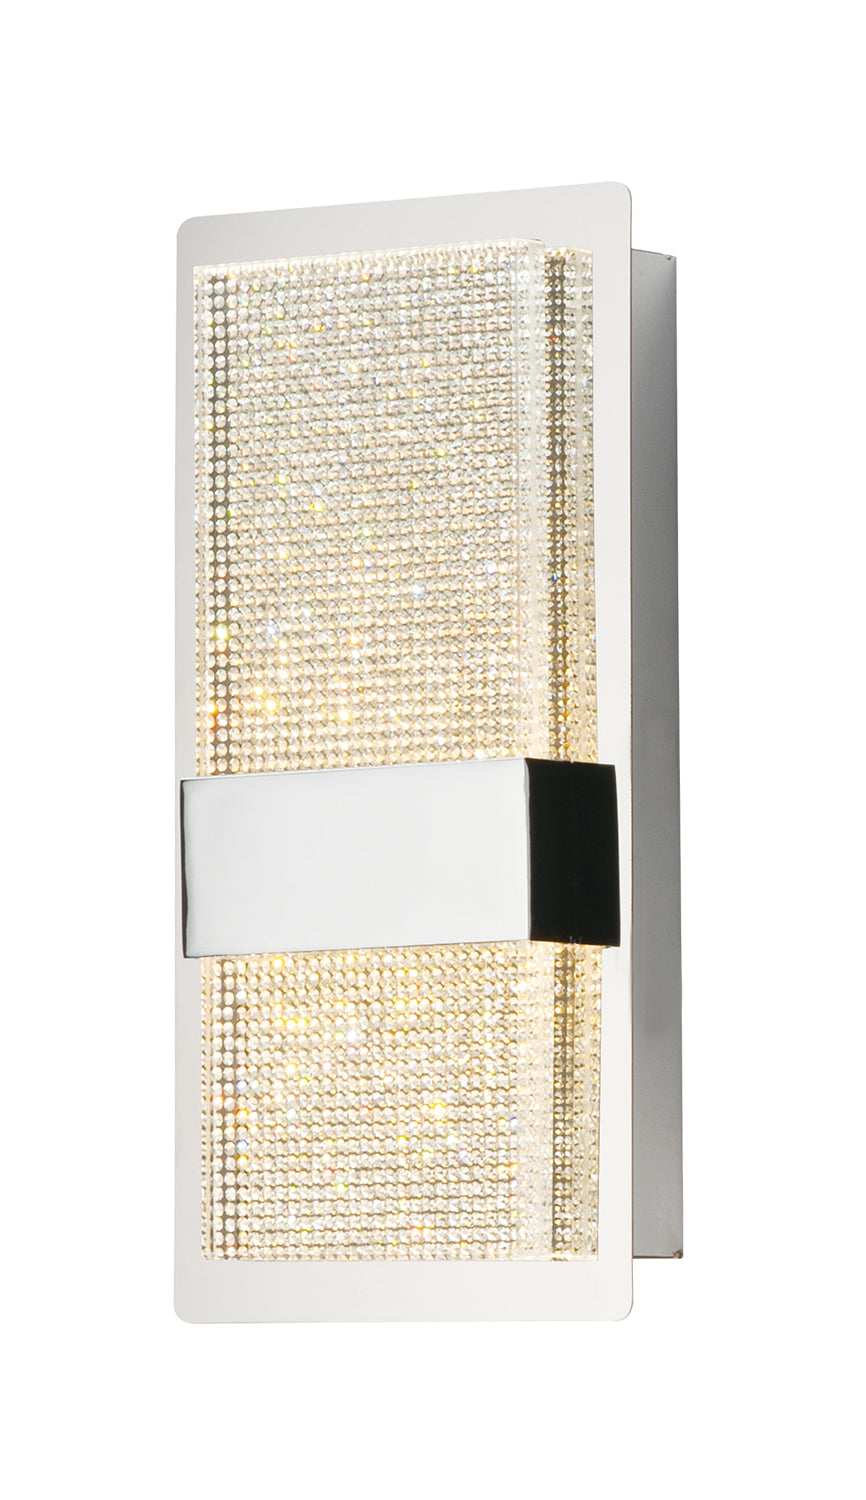 Sparkler-Wall Sconce Wall Light Fixtures ET2 x5.5x11 Polished Chrome 